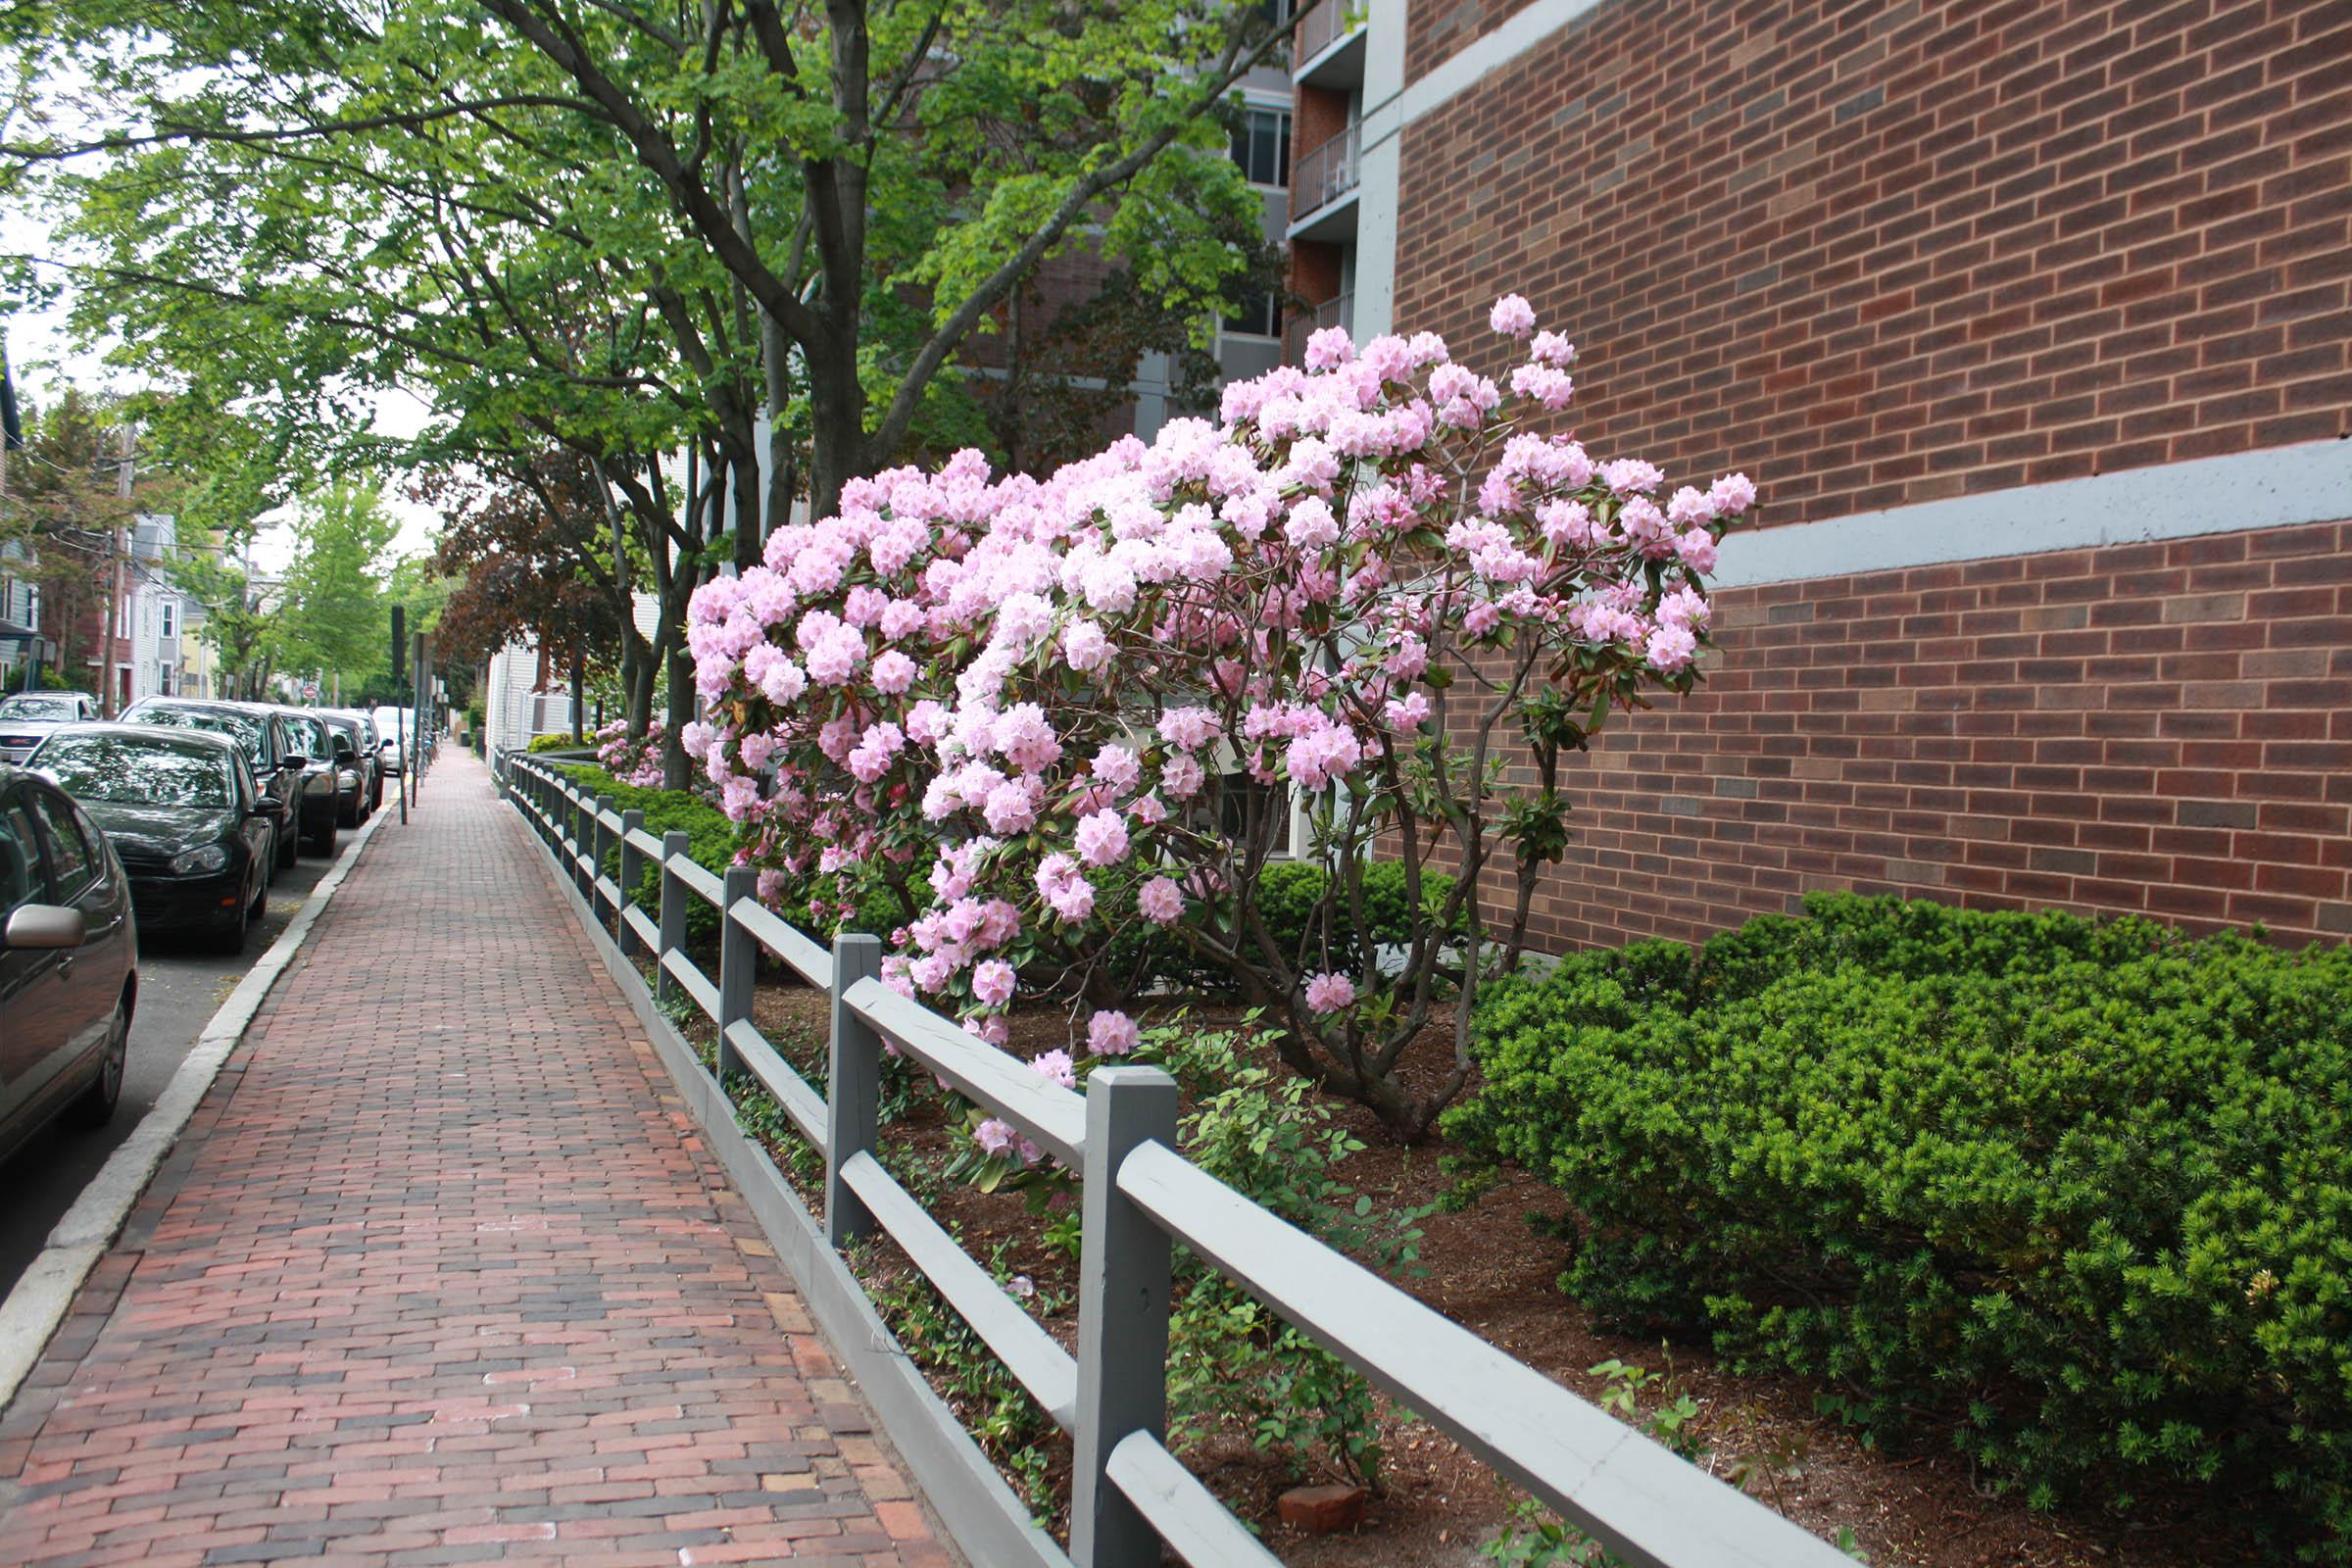 a close up of a flower garden in front of a brick building